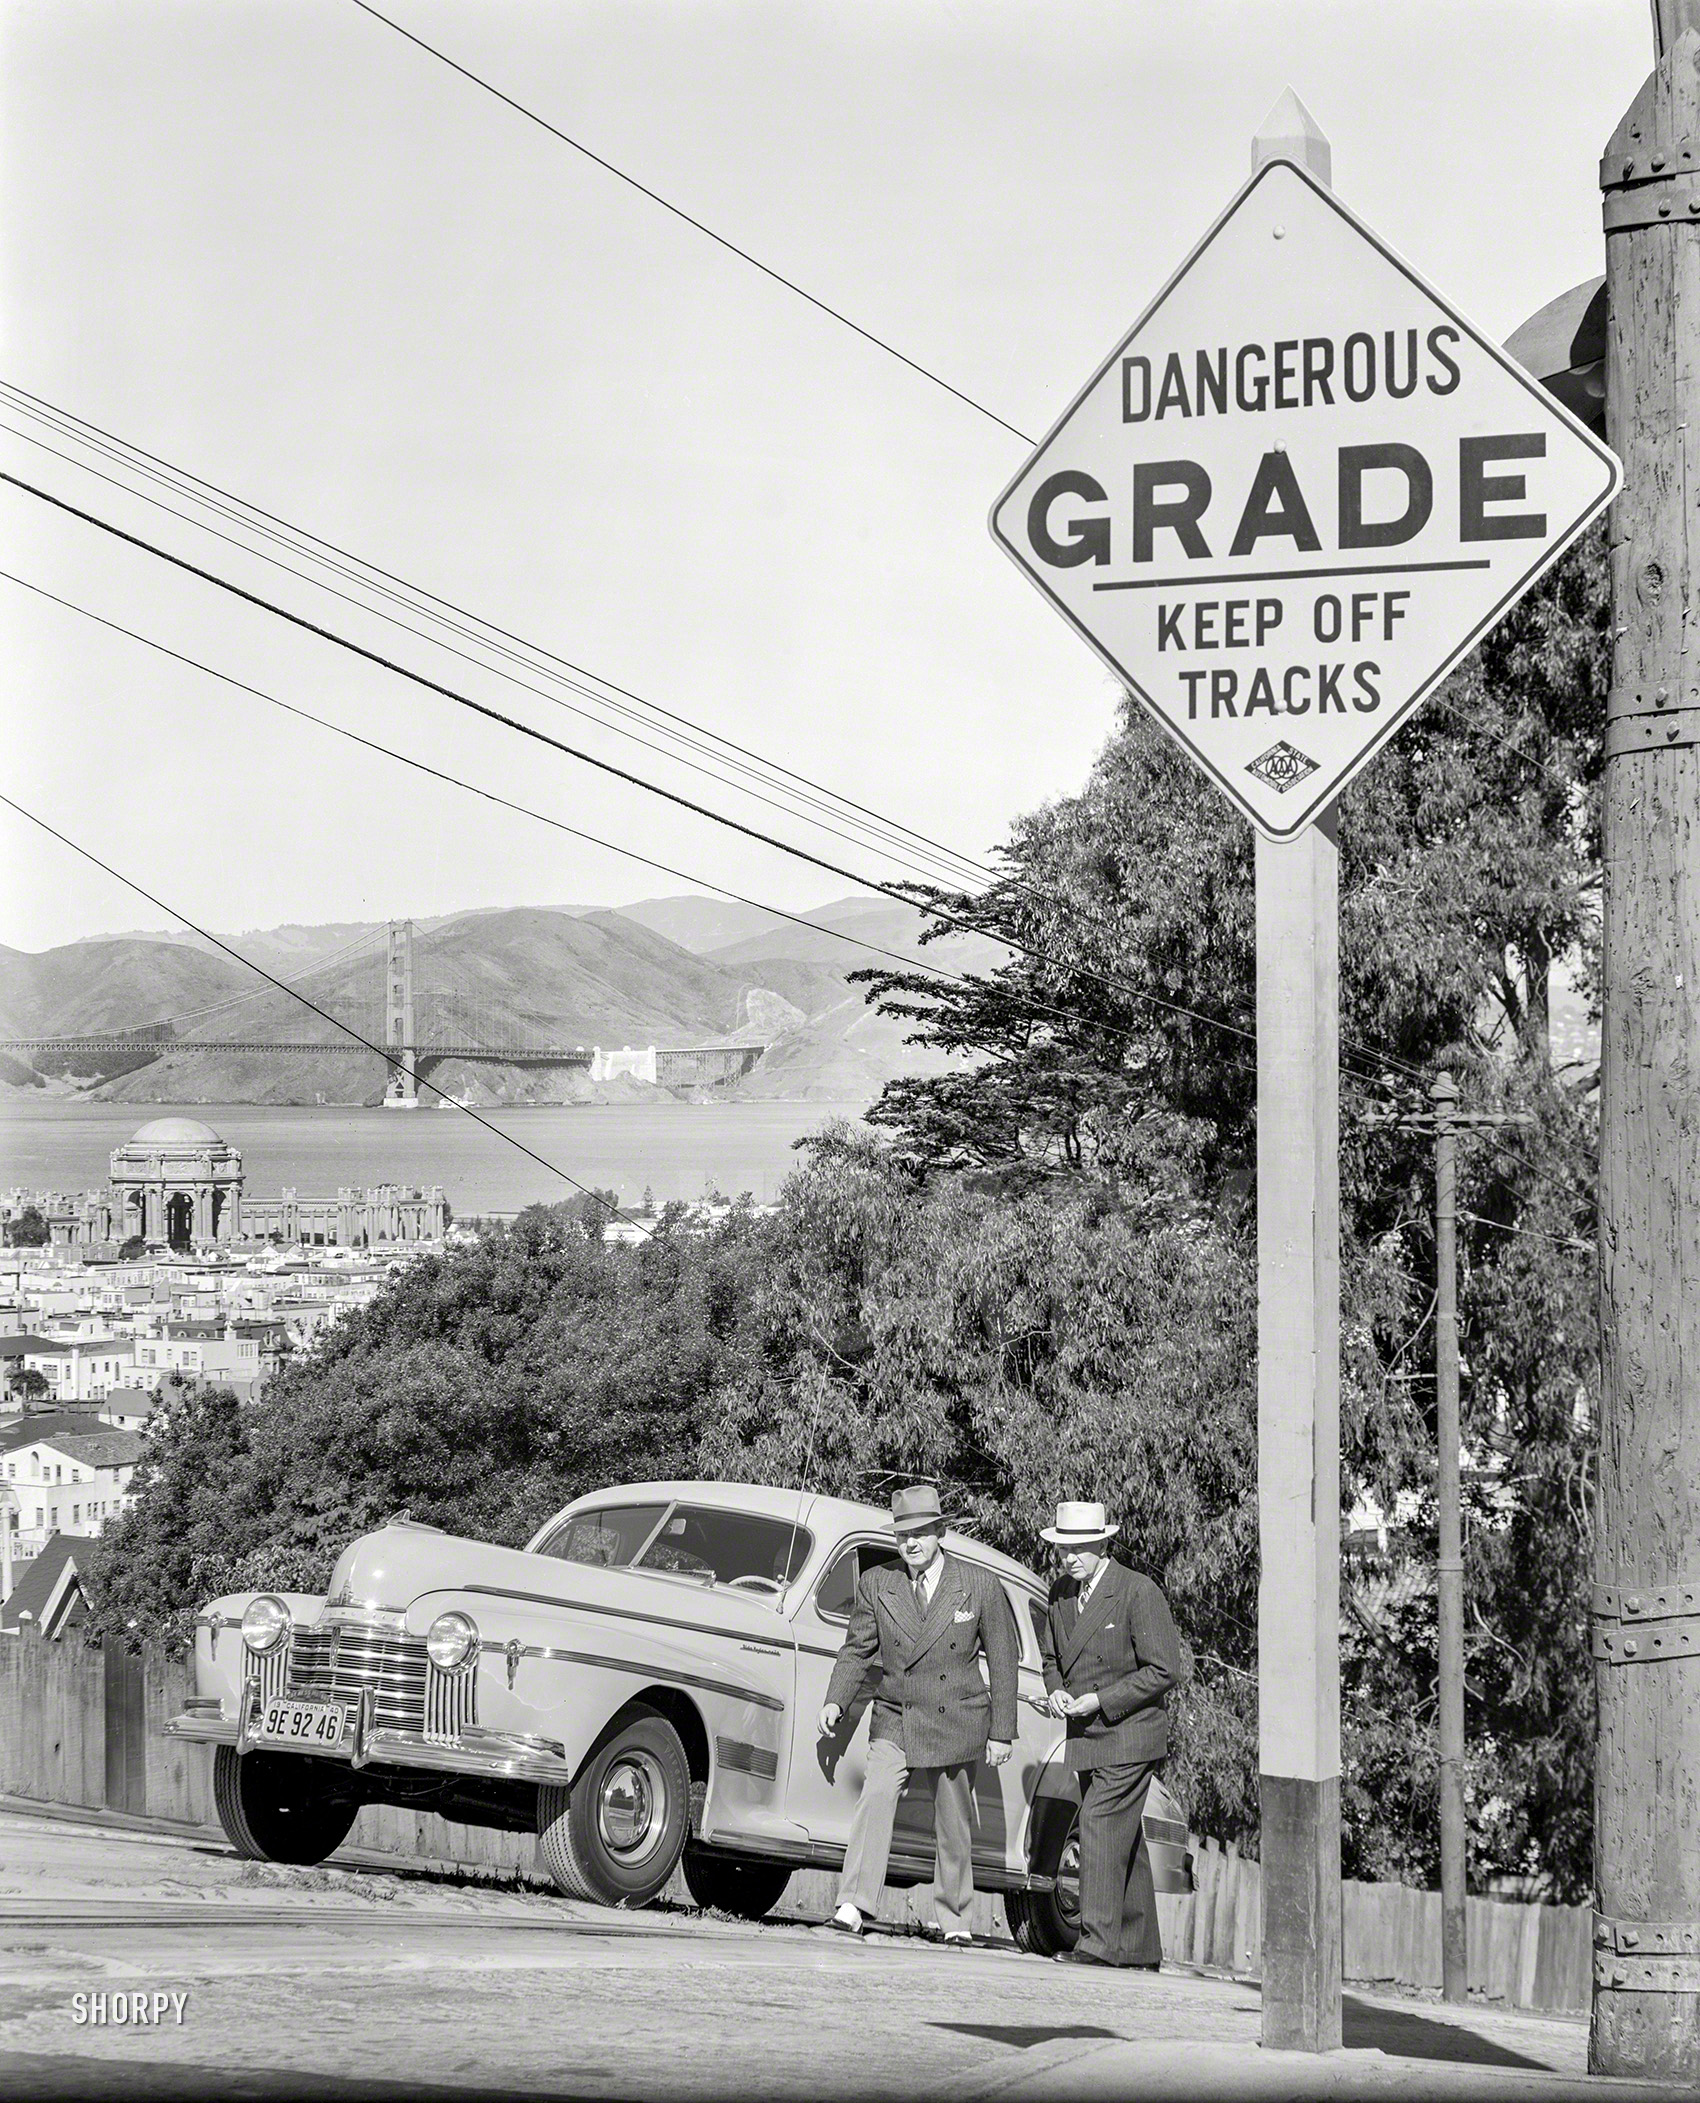 San Francisco, 1940. "Oldsmobile sedan and pedestrians ascending steep grade." With the Palace of Fine Arts and Golden Gate Bridge in the distance. 8x0 film negative, originally from the Wyland Stanley collection. View full size.